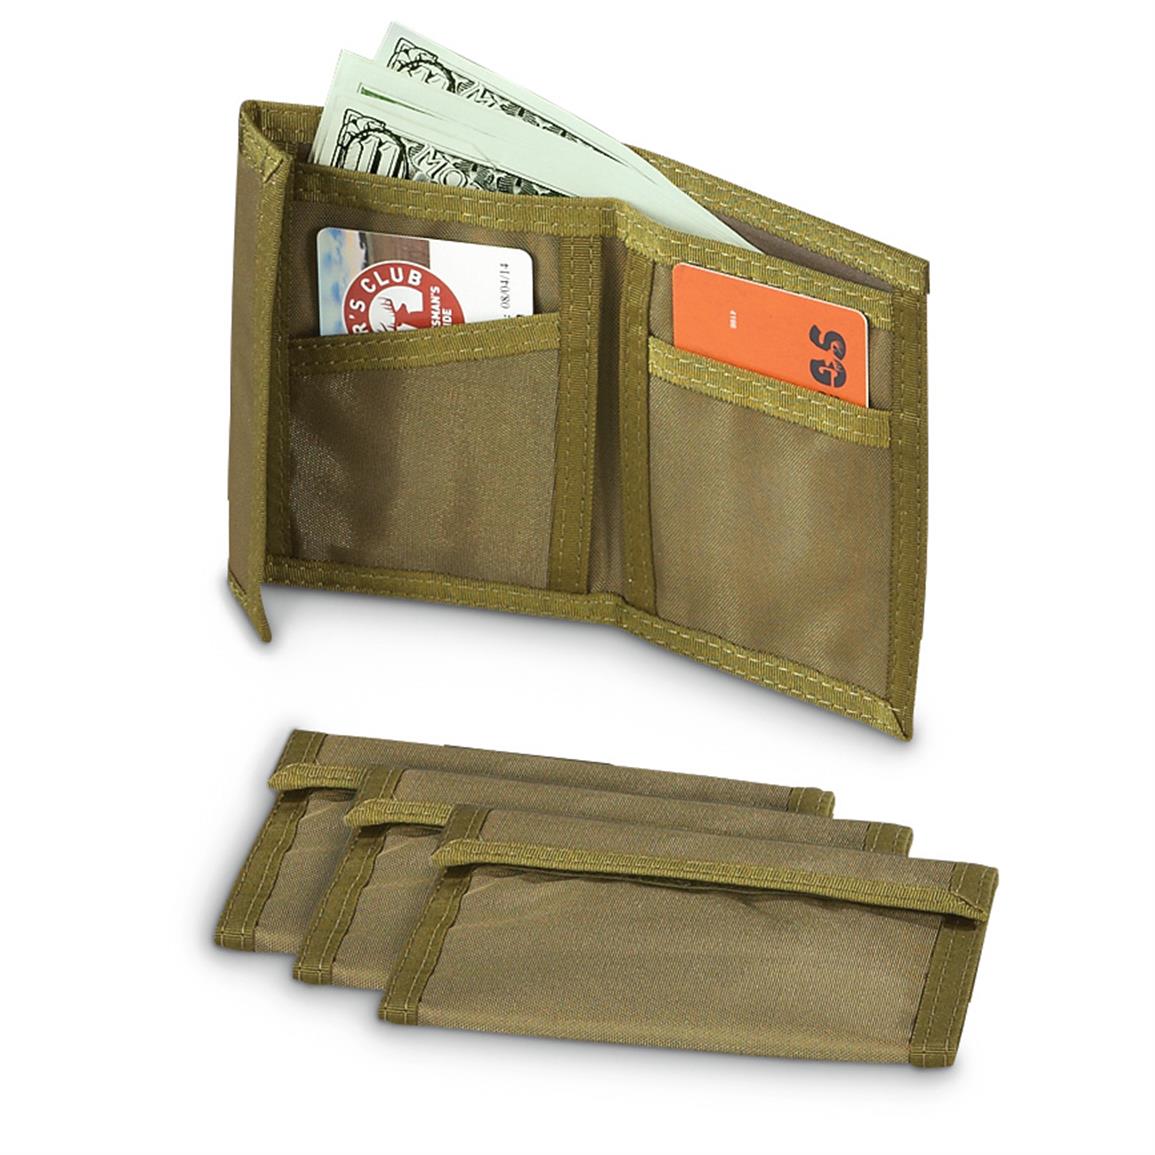 4 Military-style Folding Nylon Wallets - 622305, Personal Accessories ...